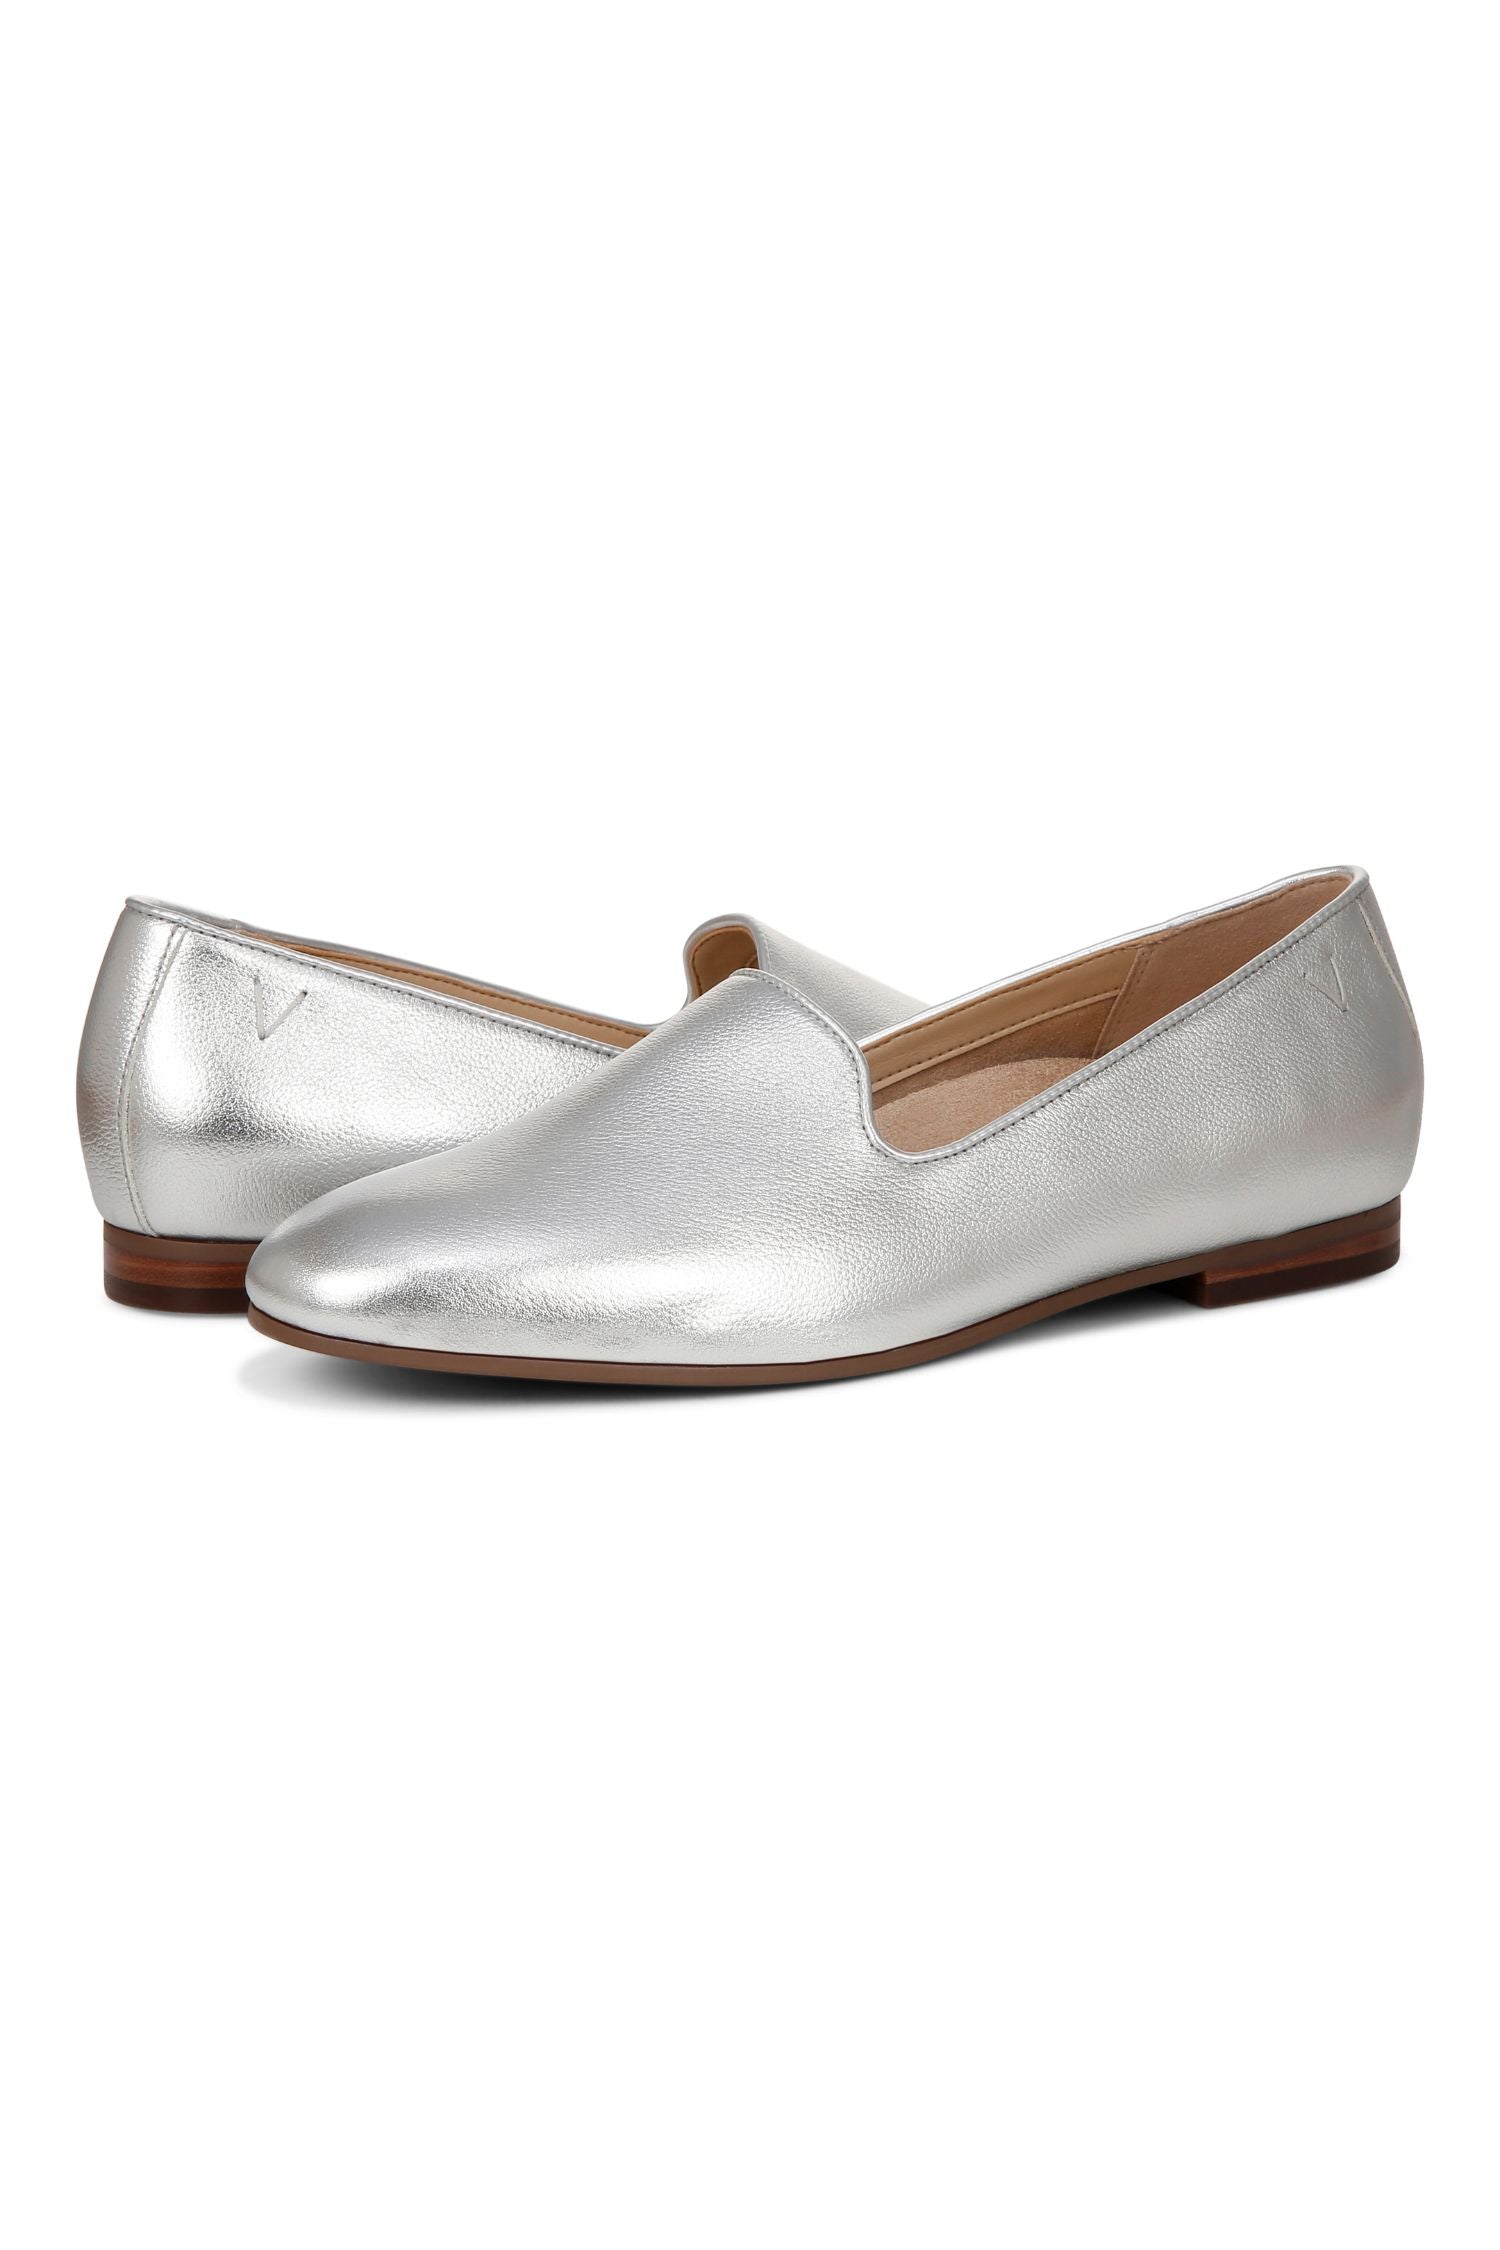 Vionic Flat Loafer - Style Willa 11, silver, pair